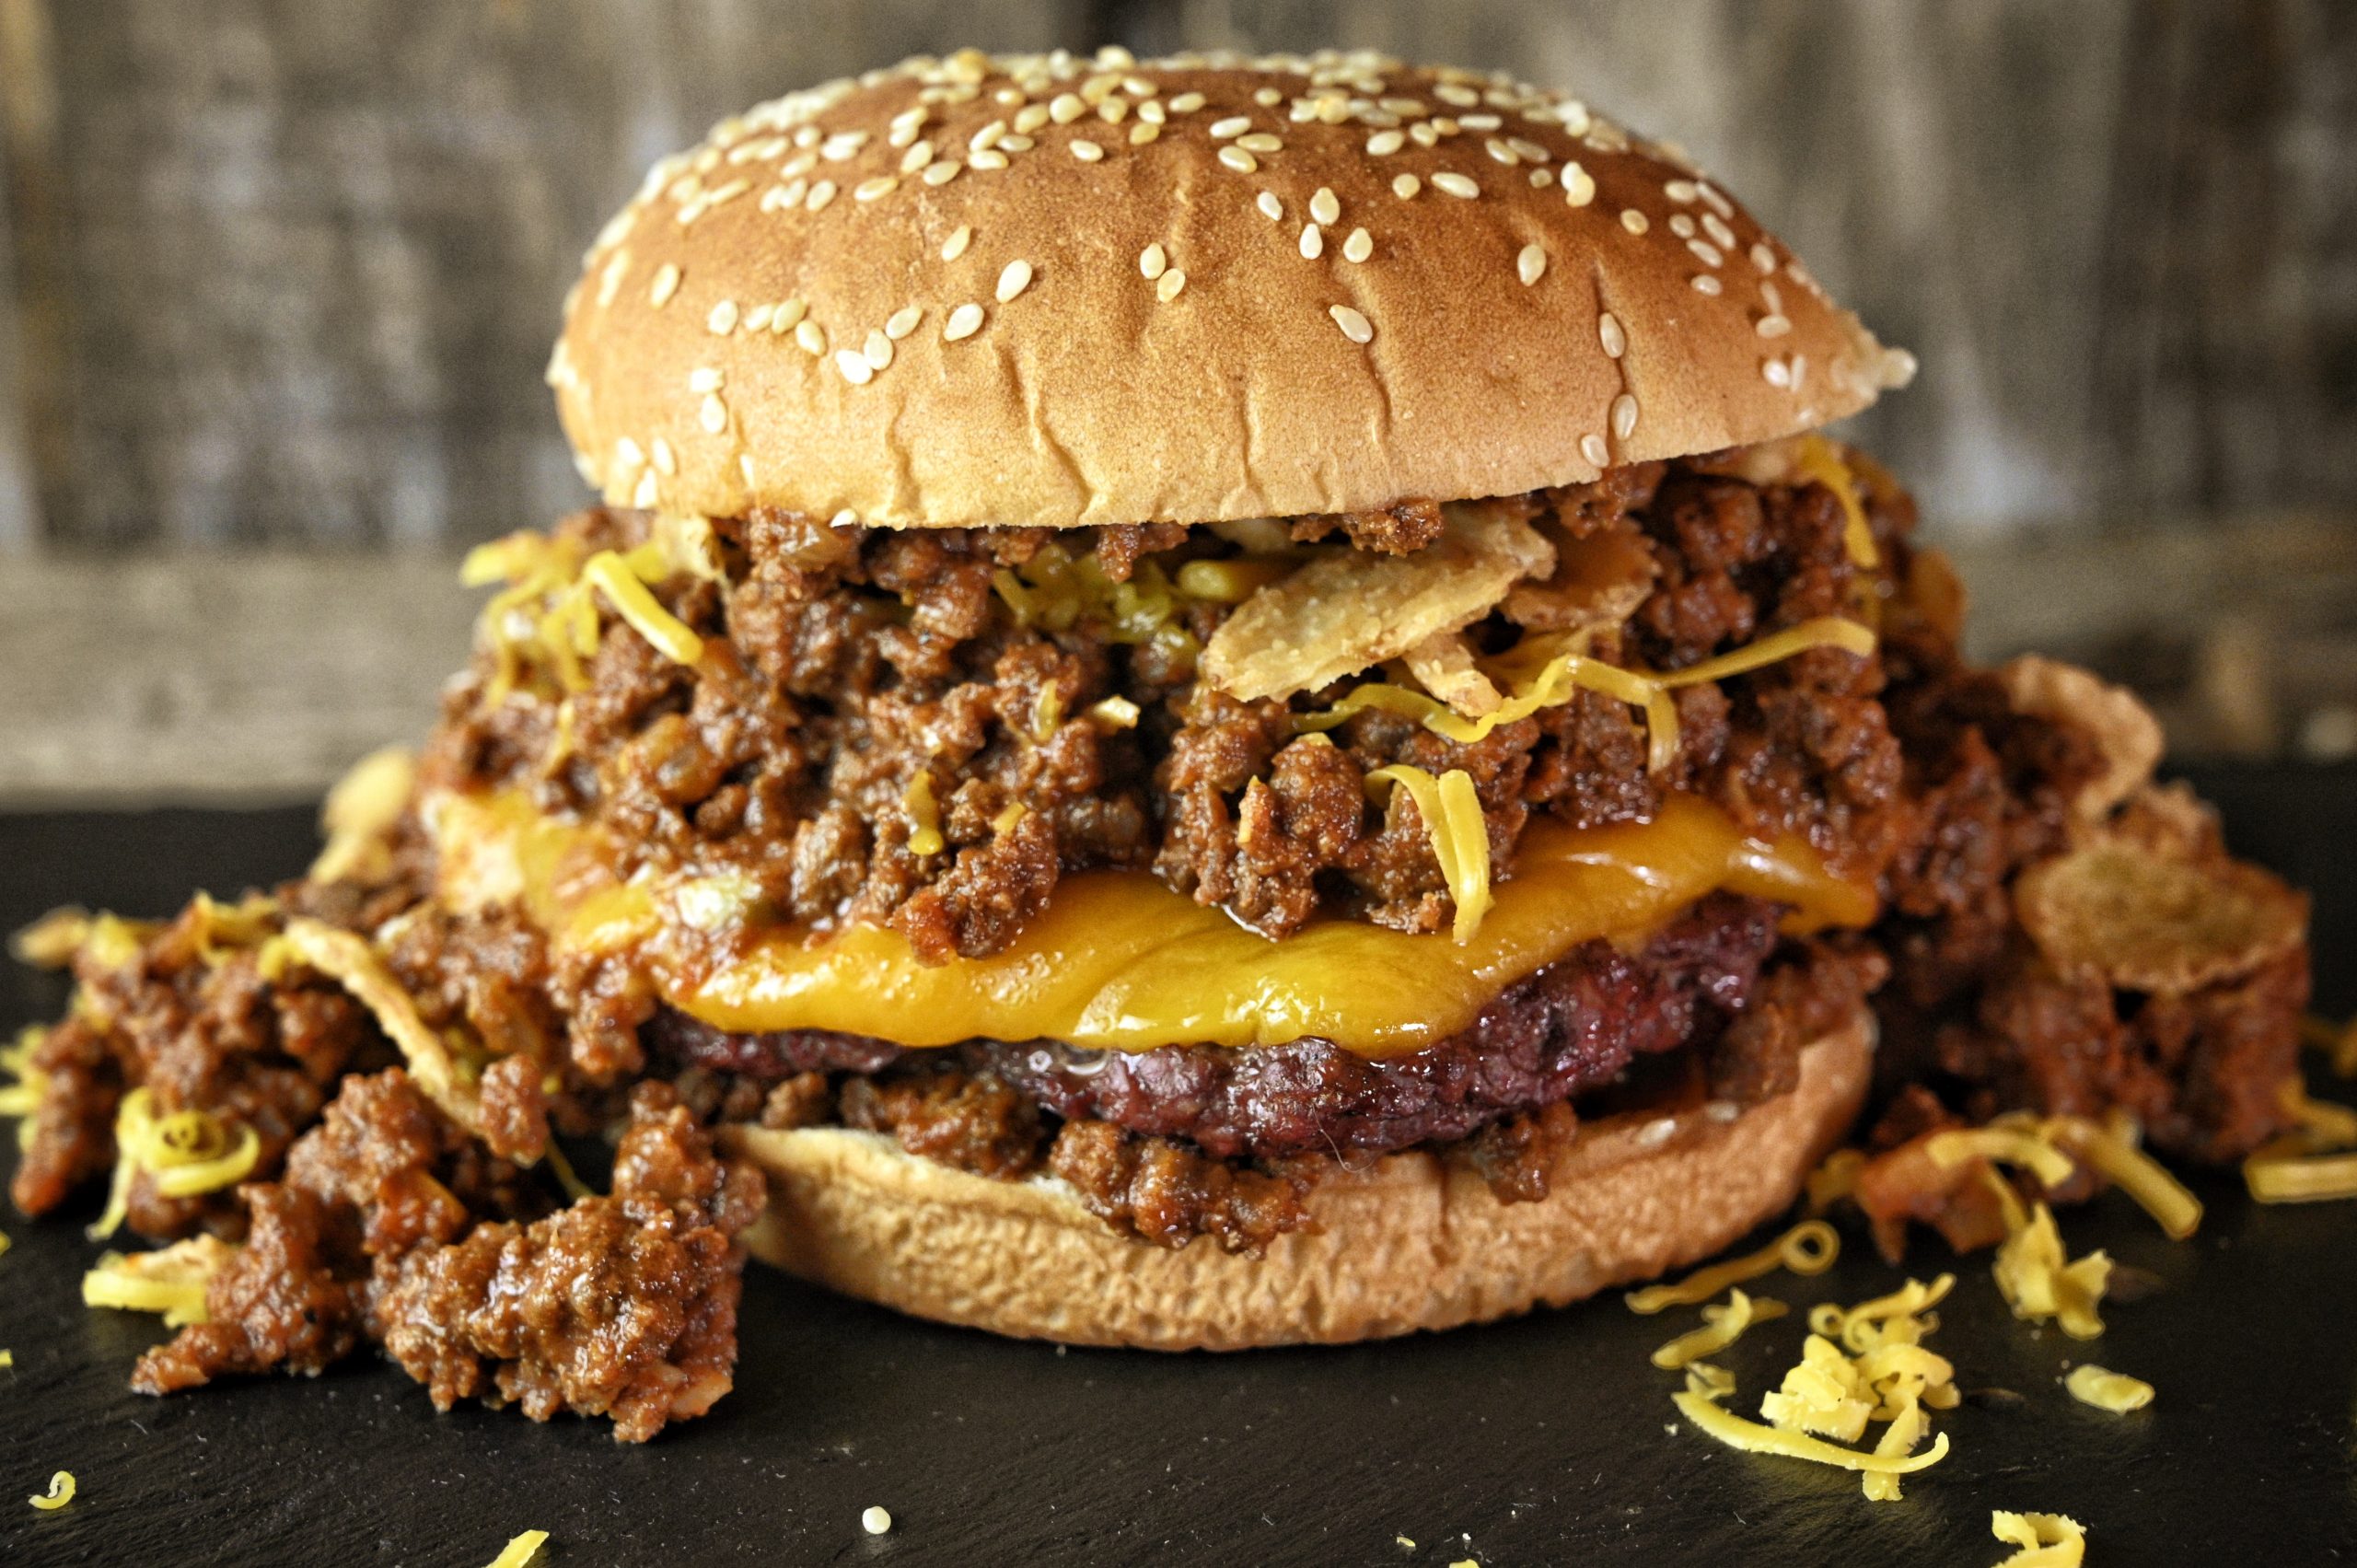 Wild Chili Cheeseburger - From Field To Plate